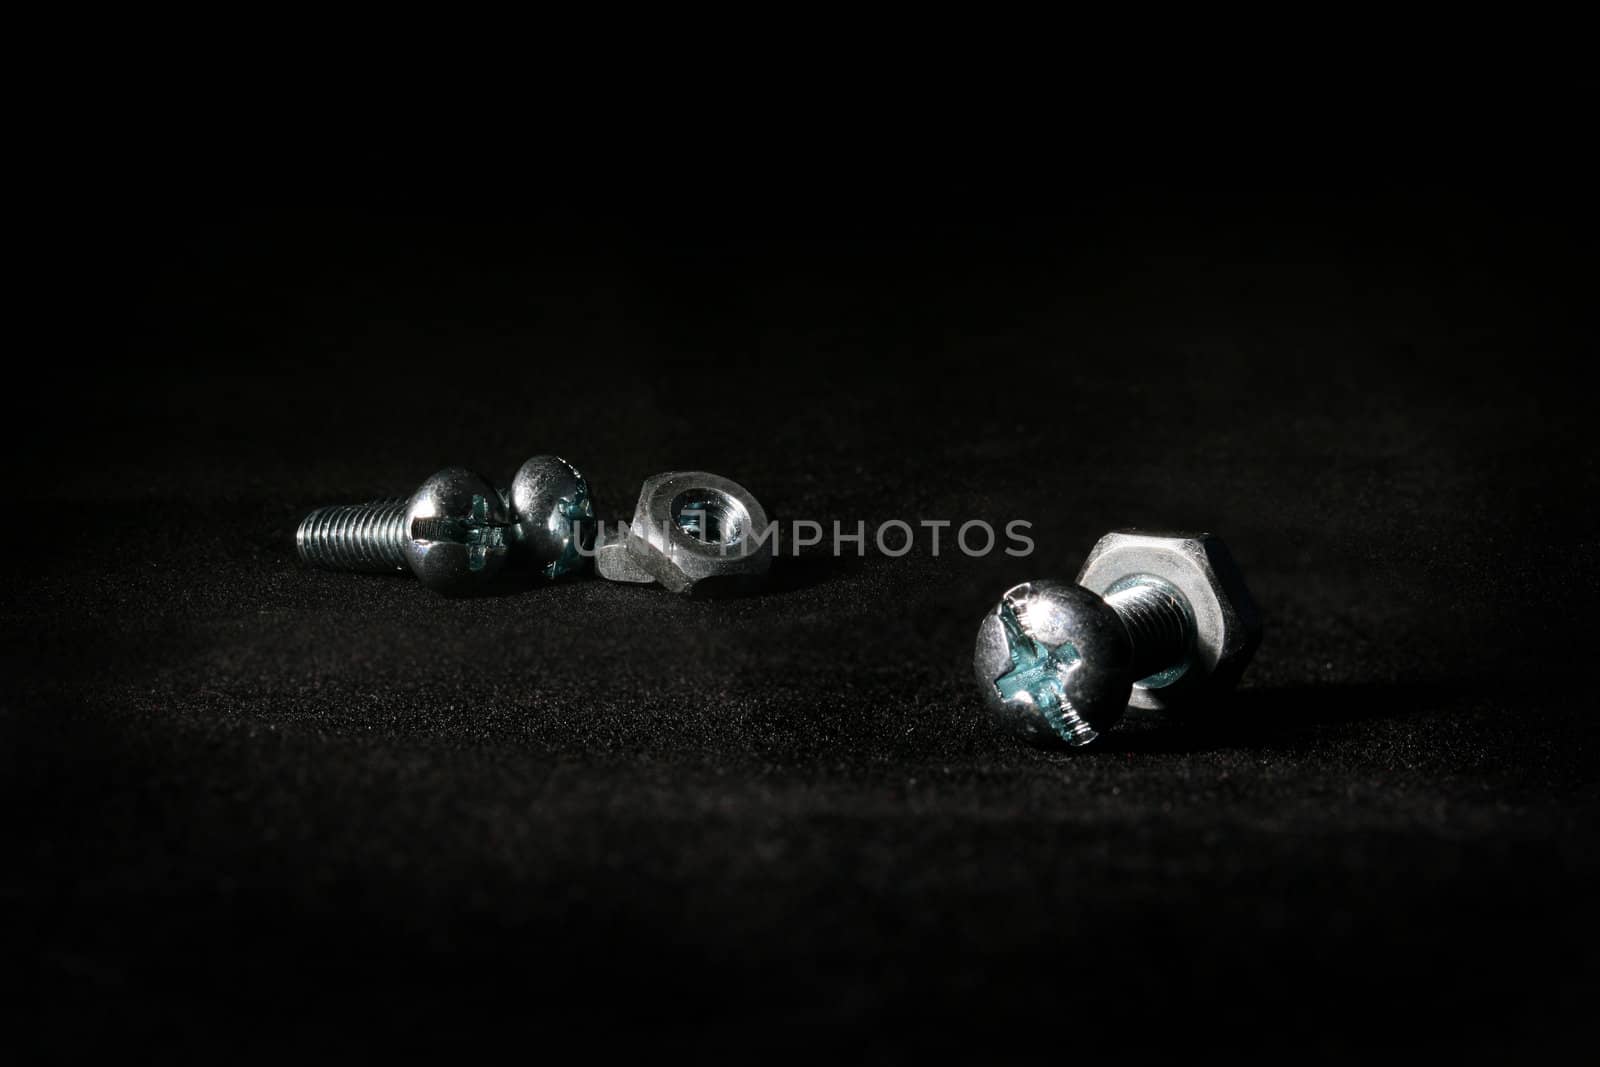 The connected bolt and nut in the foreground both two separately a bolt and two nuts on a black background.